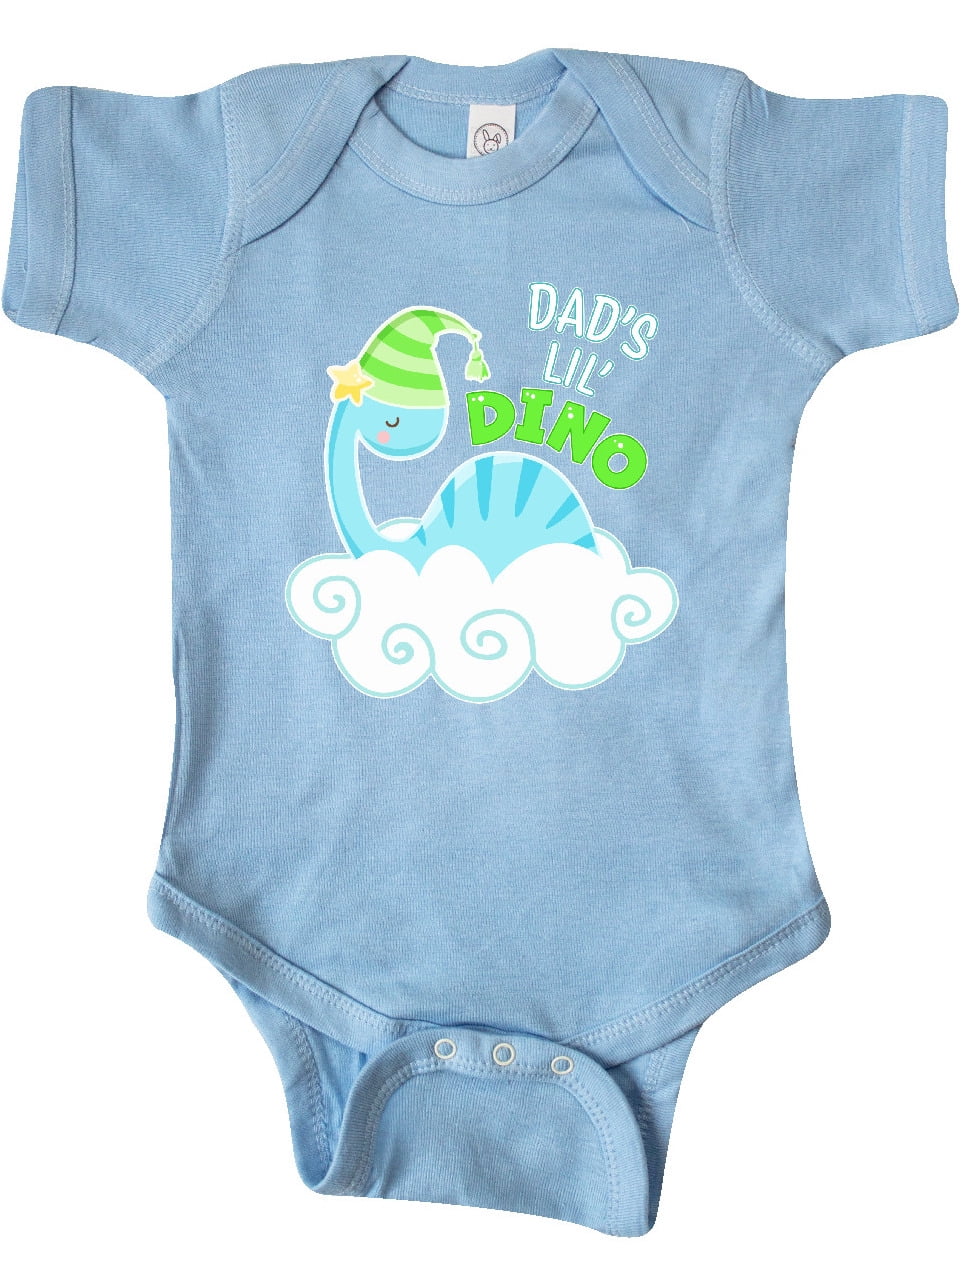 Baby Boys Bodysuit 3-6 Months Dinosaur Blue Creeper Outfit One Piece Infant 